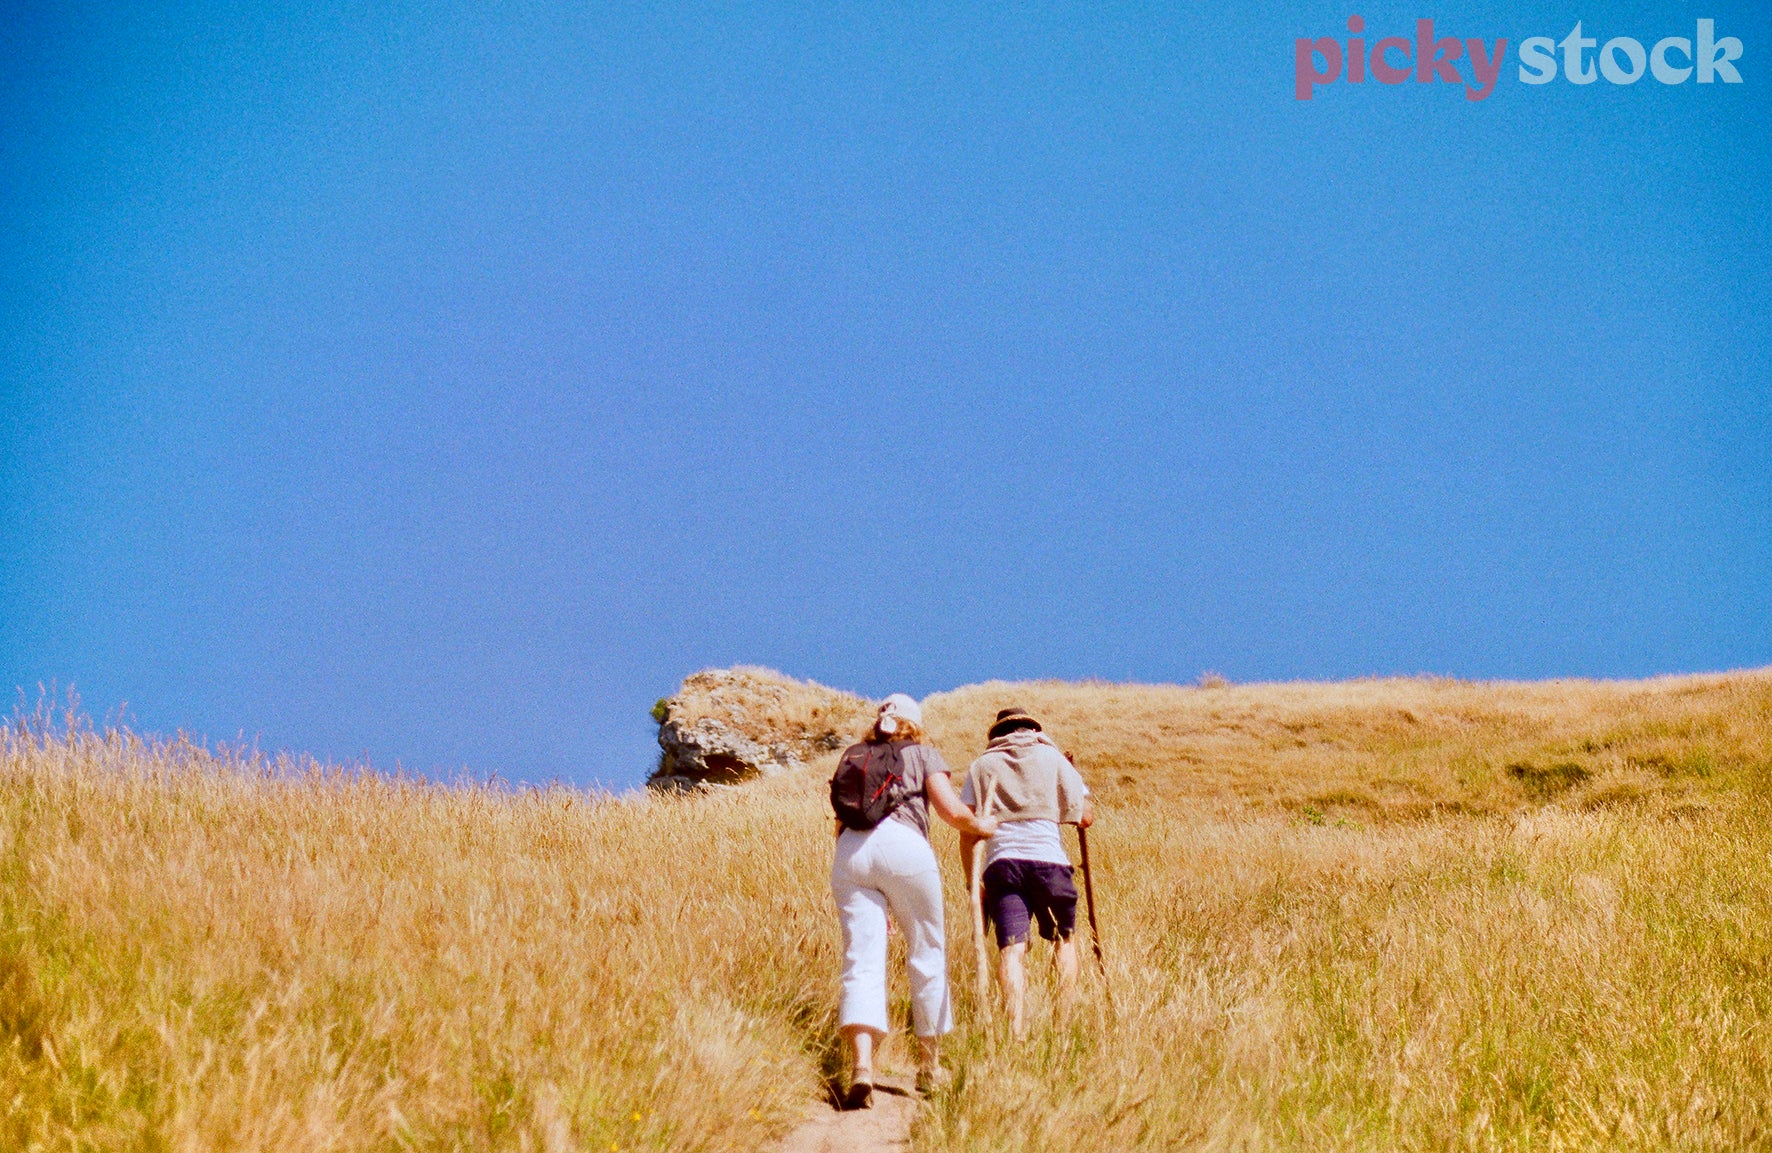 A man and lady walk up to the Te Mata Peak. Wearing casual clothing, not formal hiking gear. Using sticks as makeshift hiking poles. Lady is wearing white pants with a brown packpack. Male has a light beige jumper tied around his shoulders. Sky is very blue, not a cloud in the sky. Grass is very dry and a soft yellow and brown